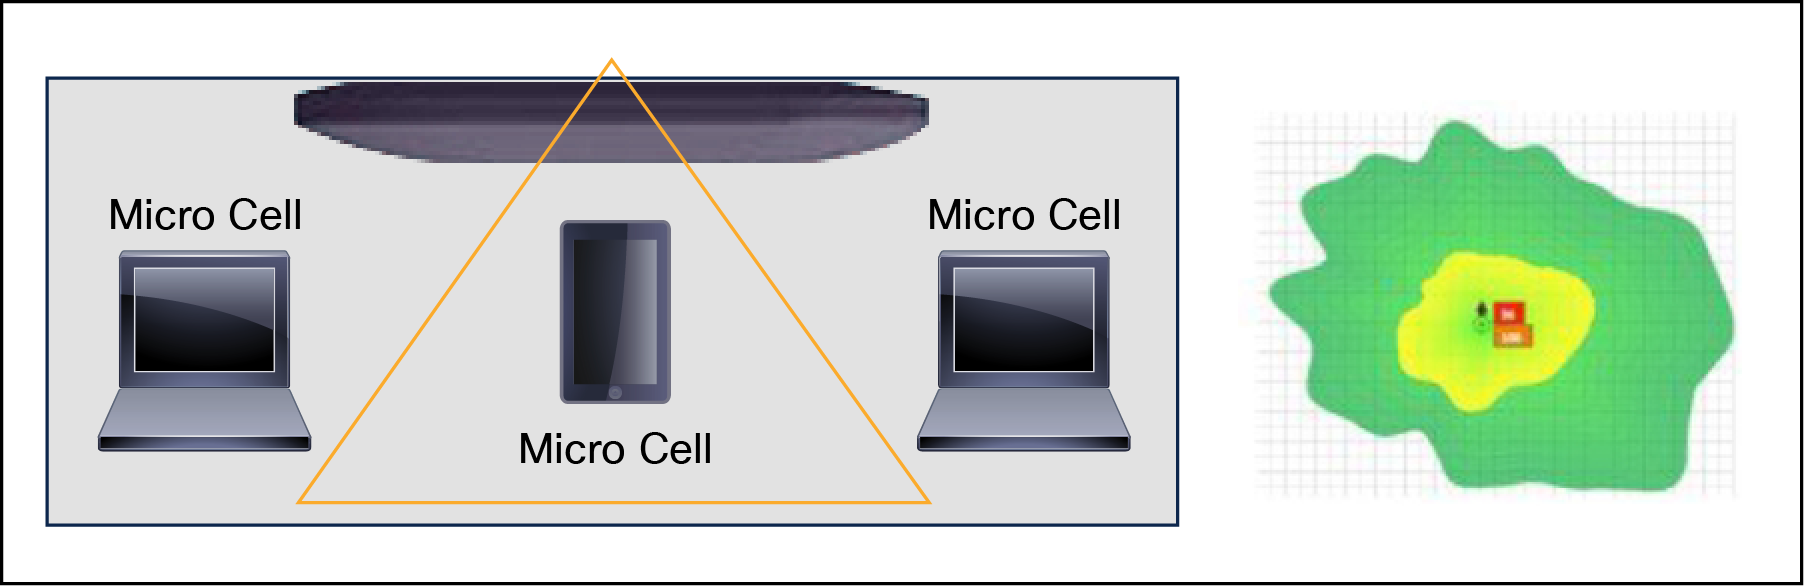 Picture of a Macro and Micro cell